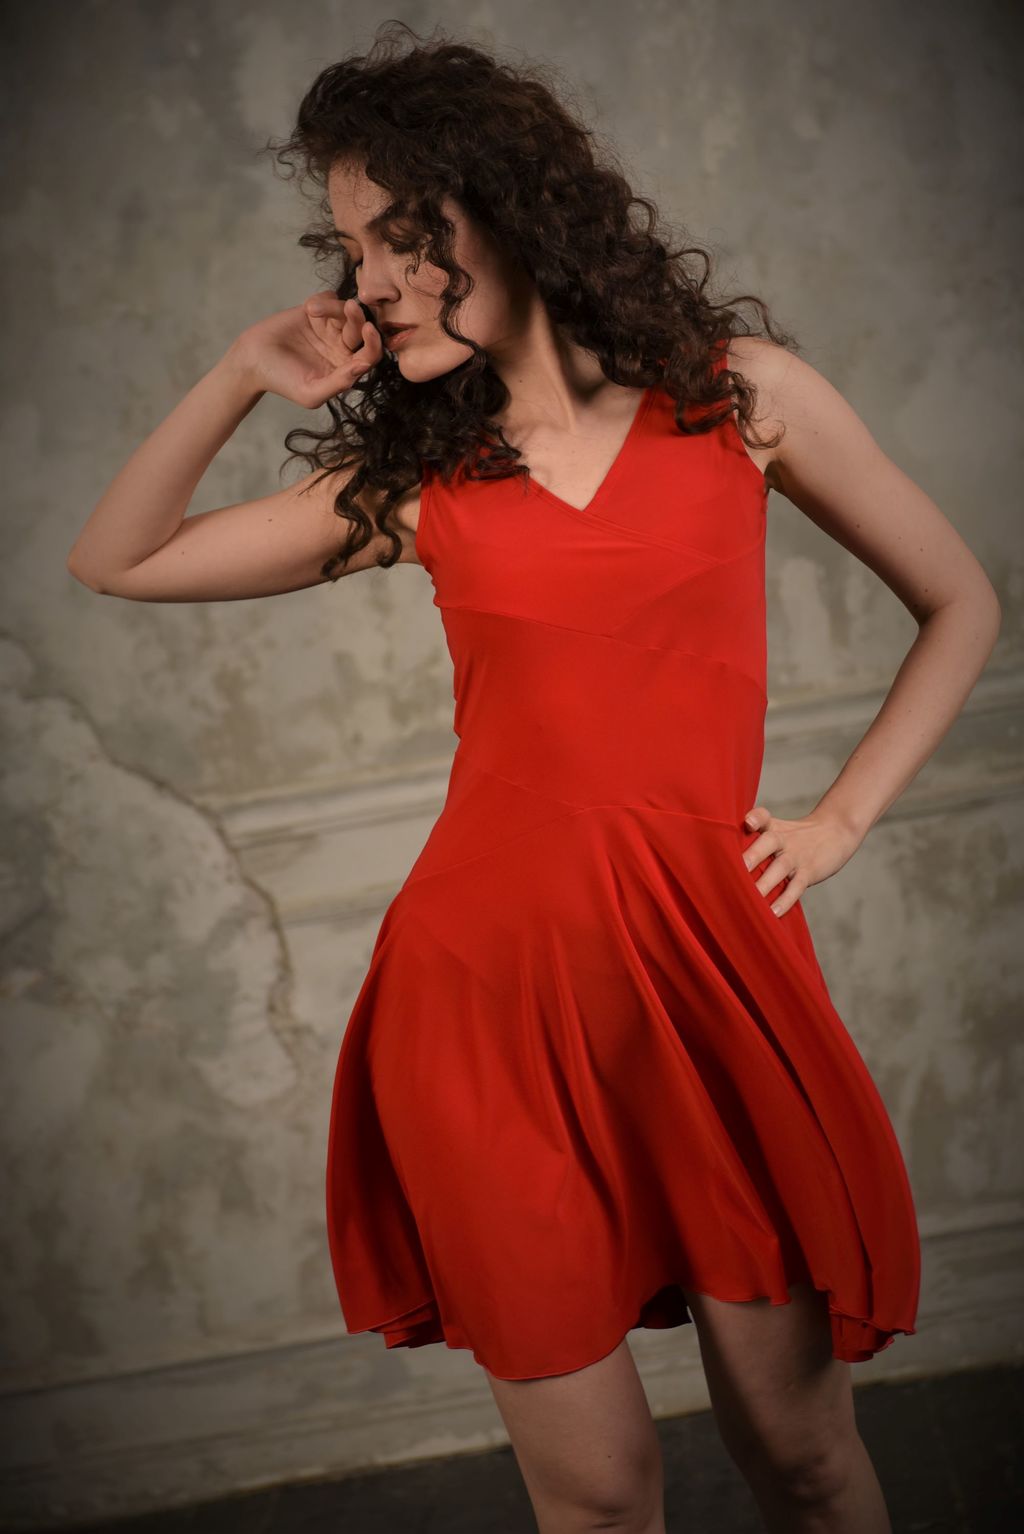 Red tango dress by StudioMoscow